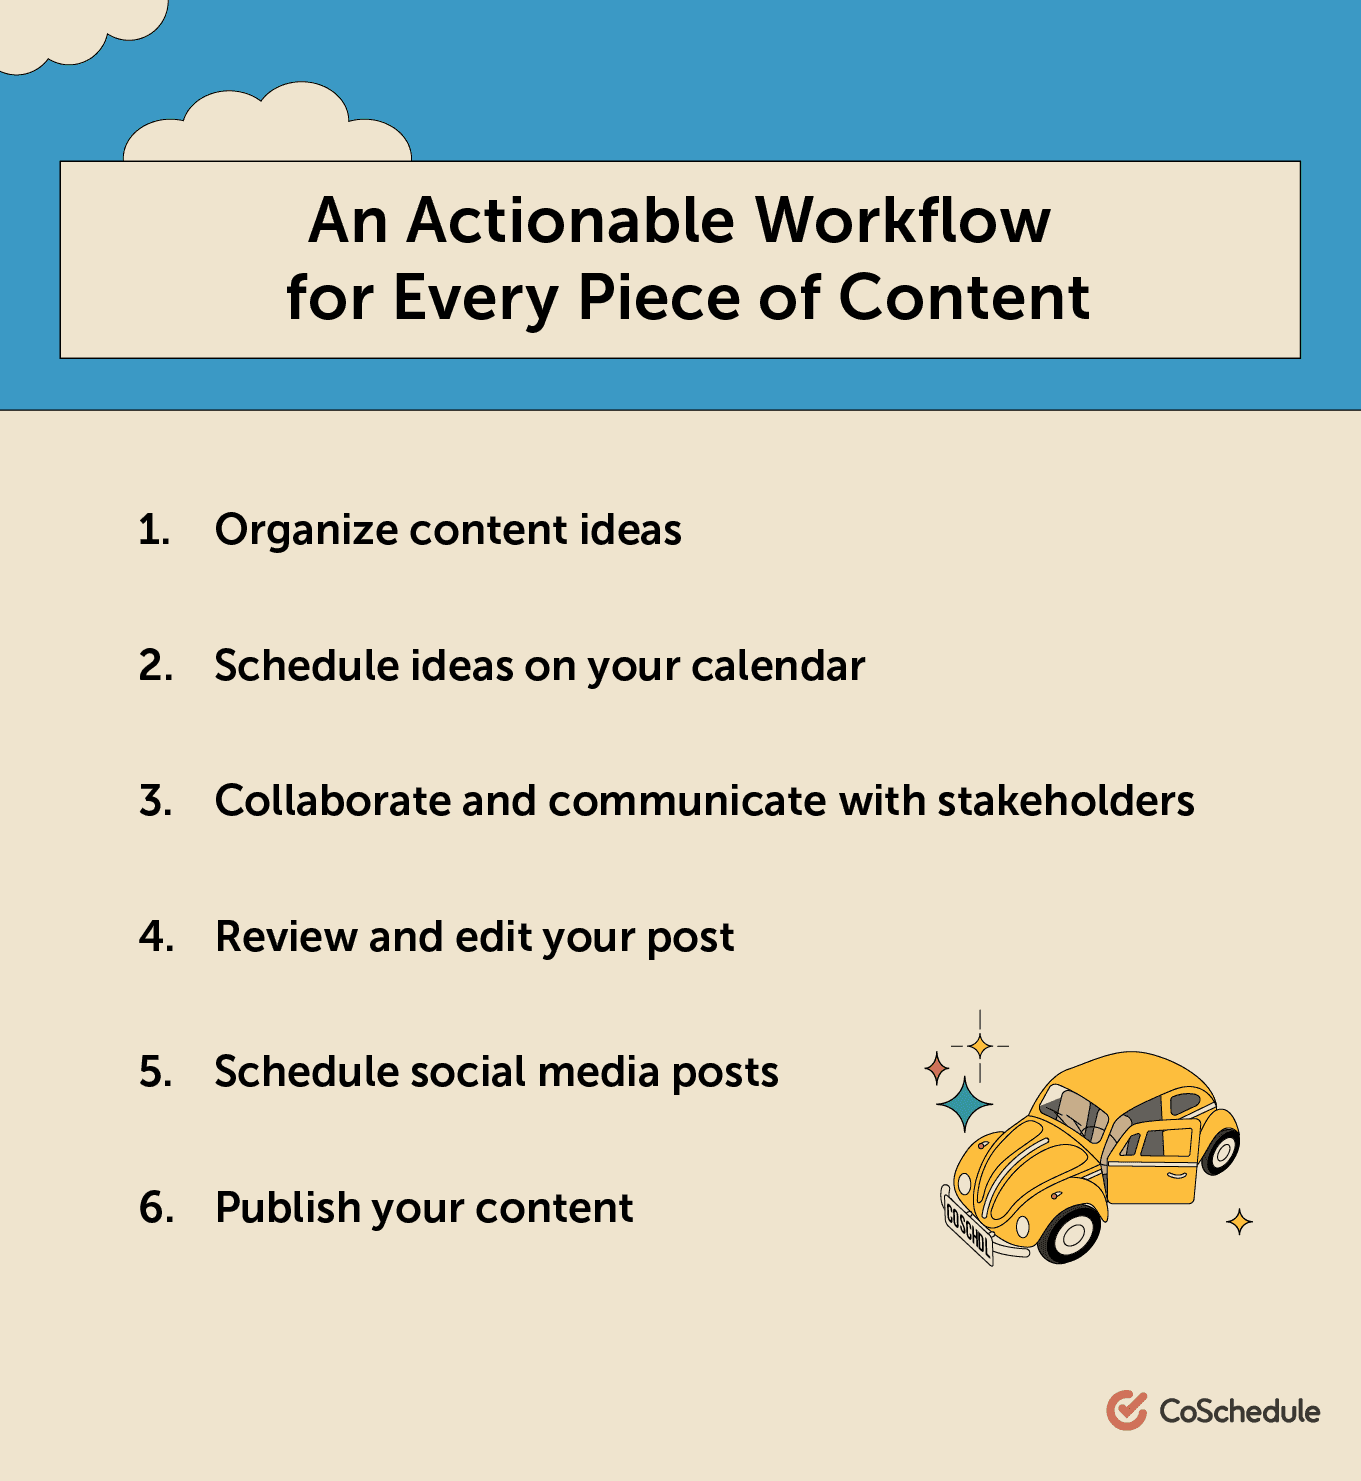 Create an actionable workflow for every piece of content